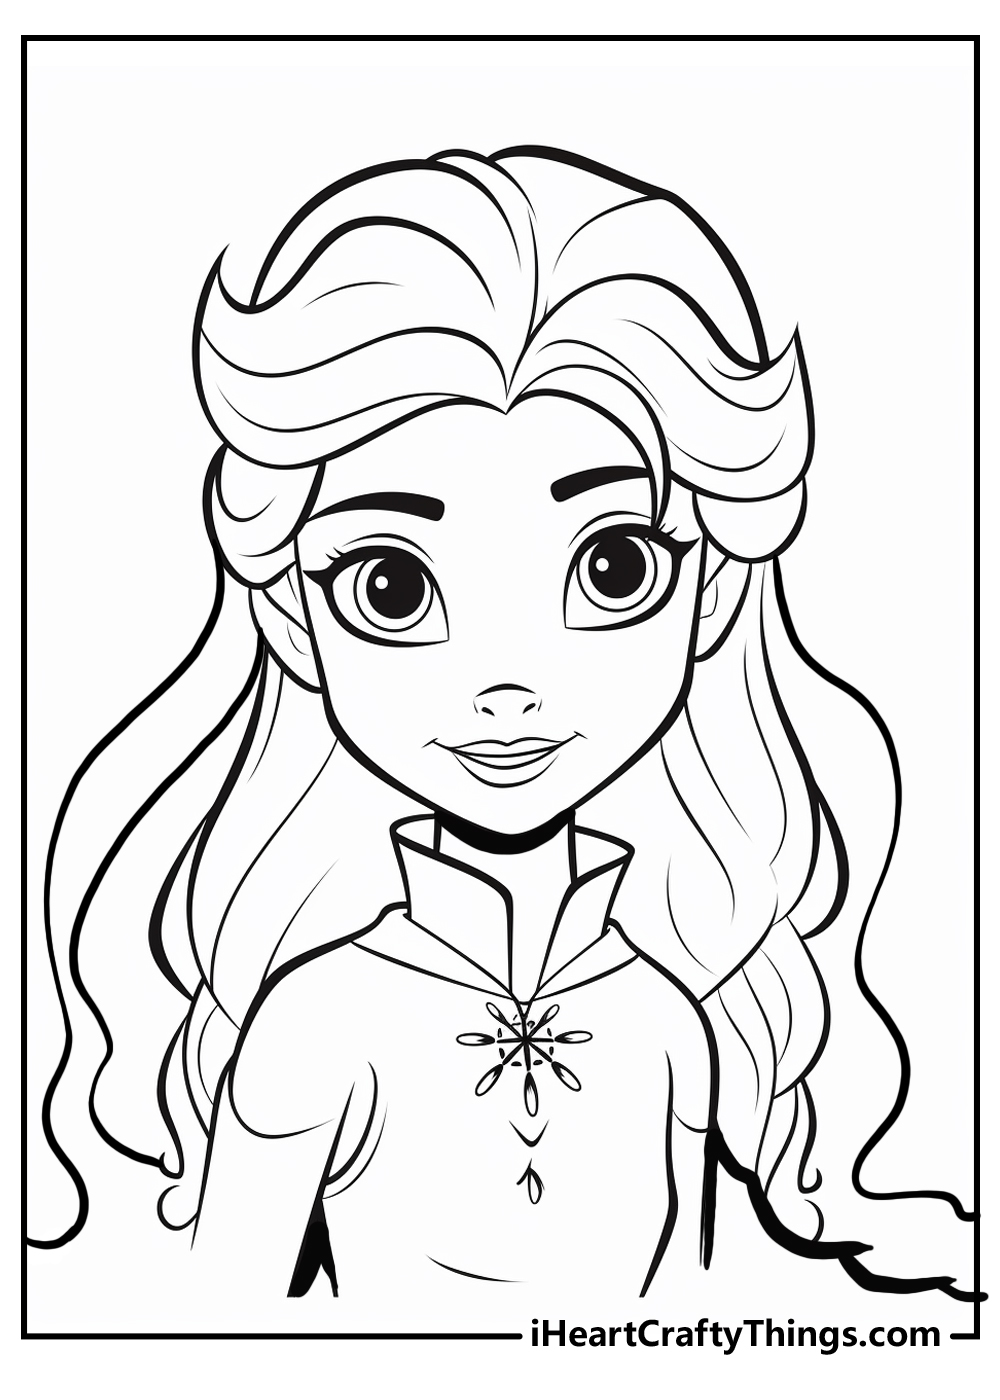 How To Draw Anna From Frozen *NEW* - Art For Kids Hub -